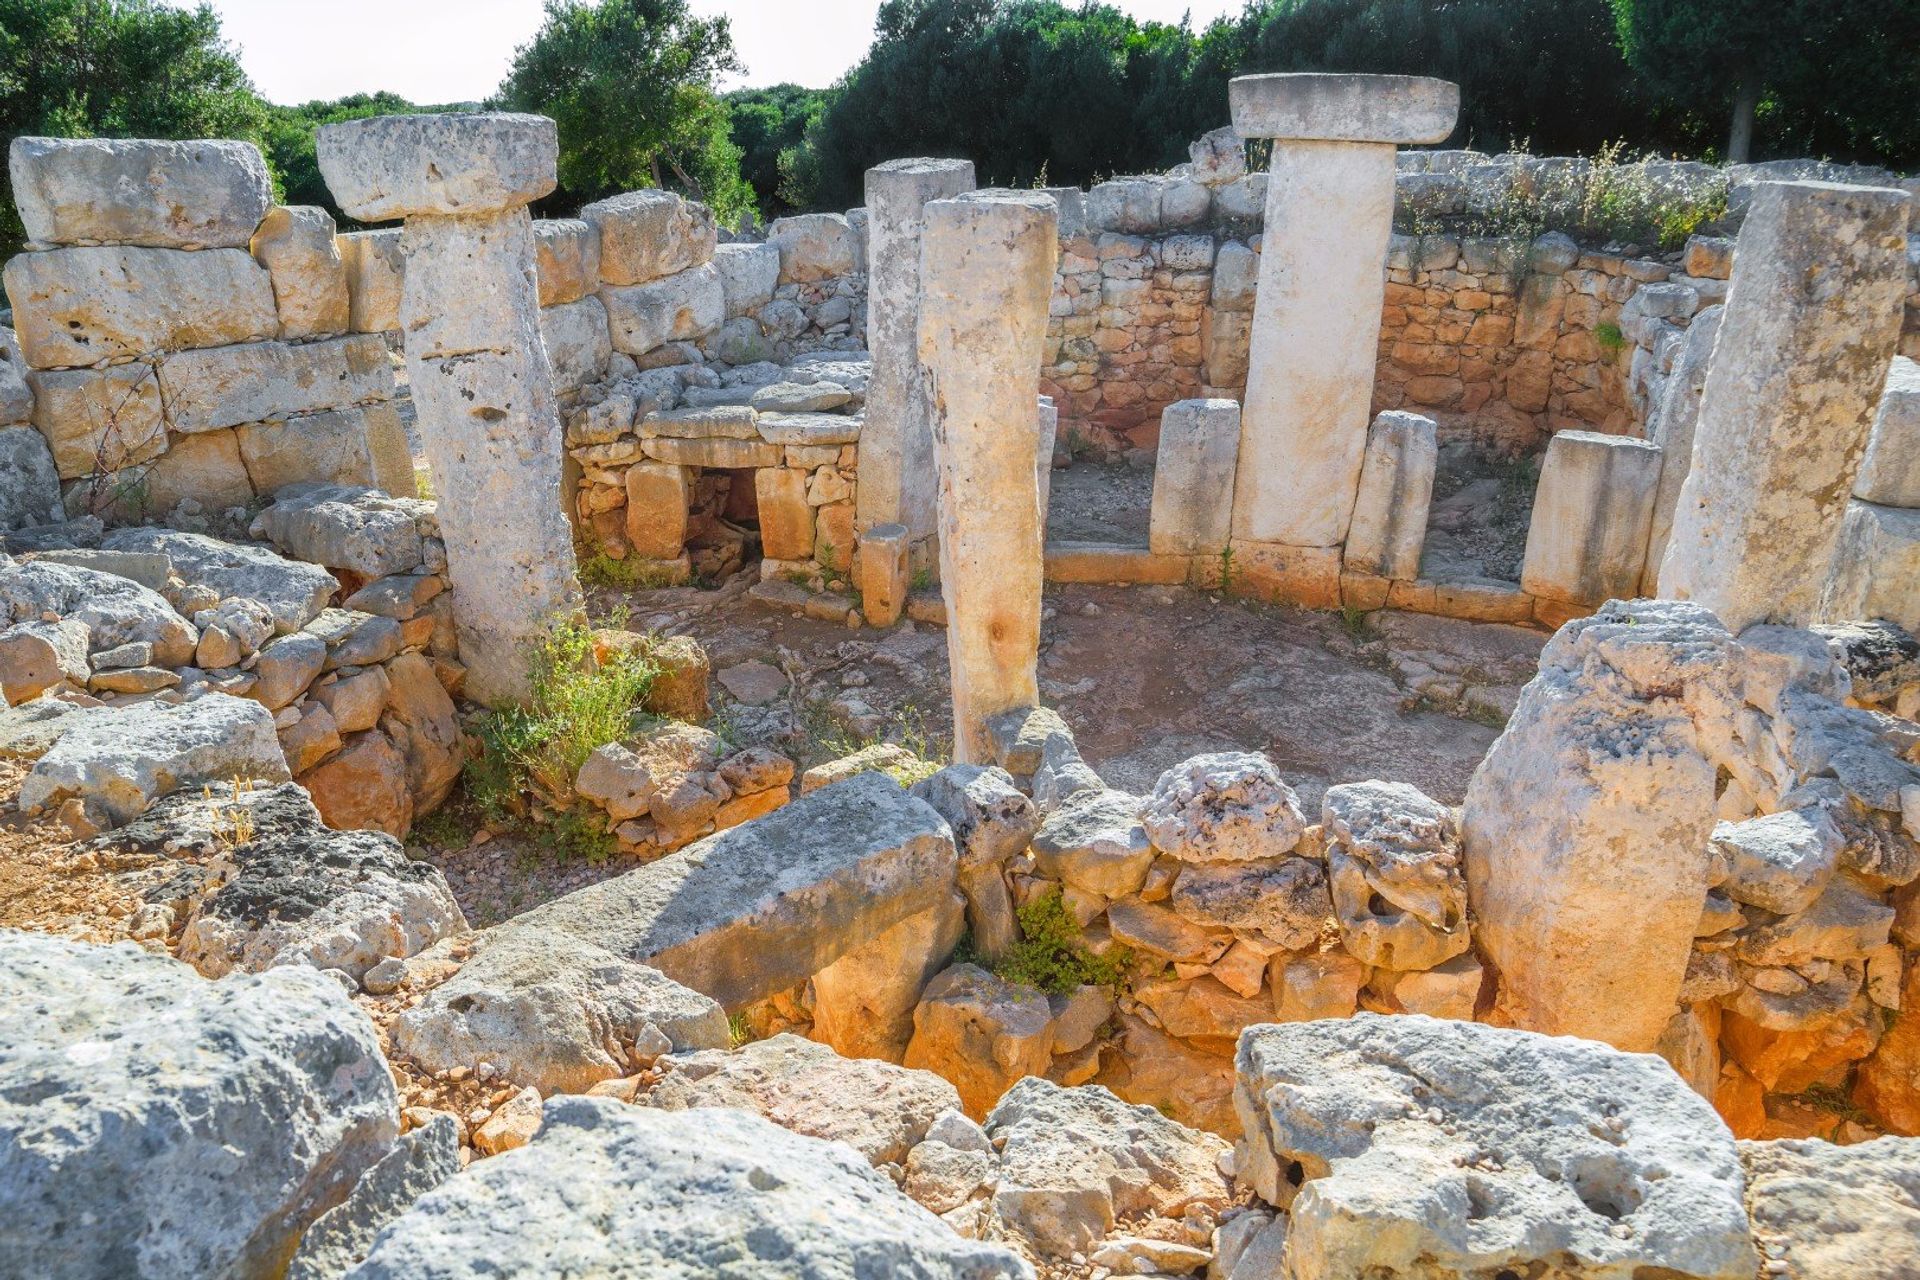 The ancient ruins at Torre d'en Galmés in south eastern Menorca's